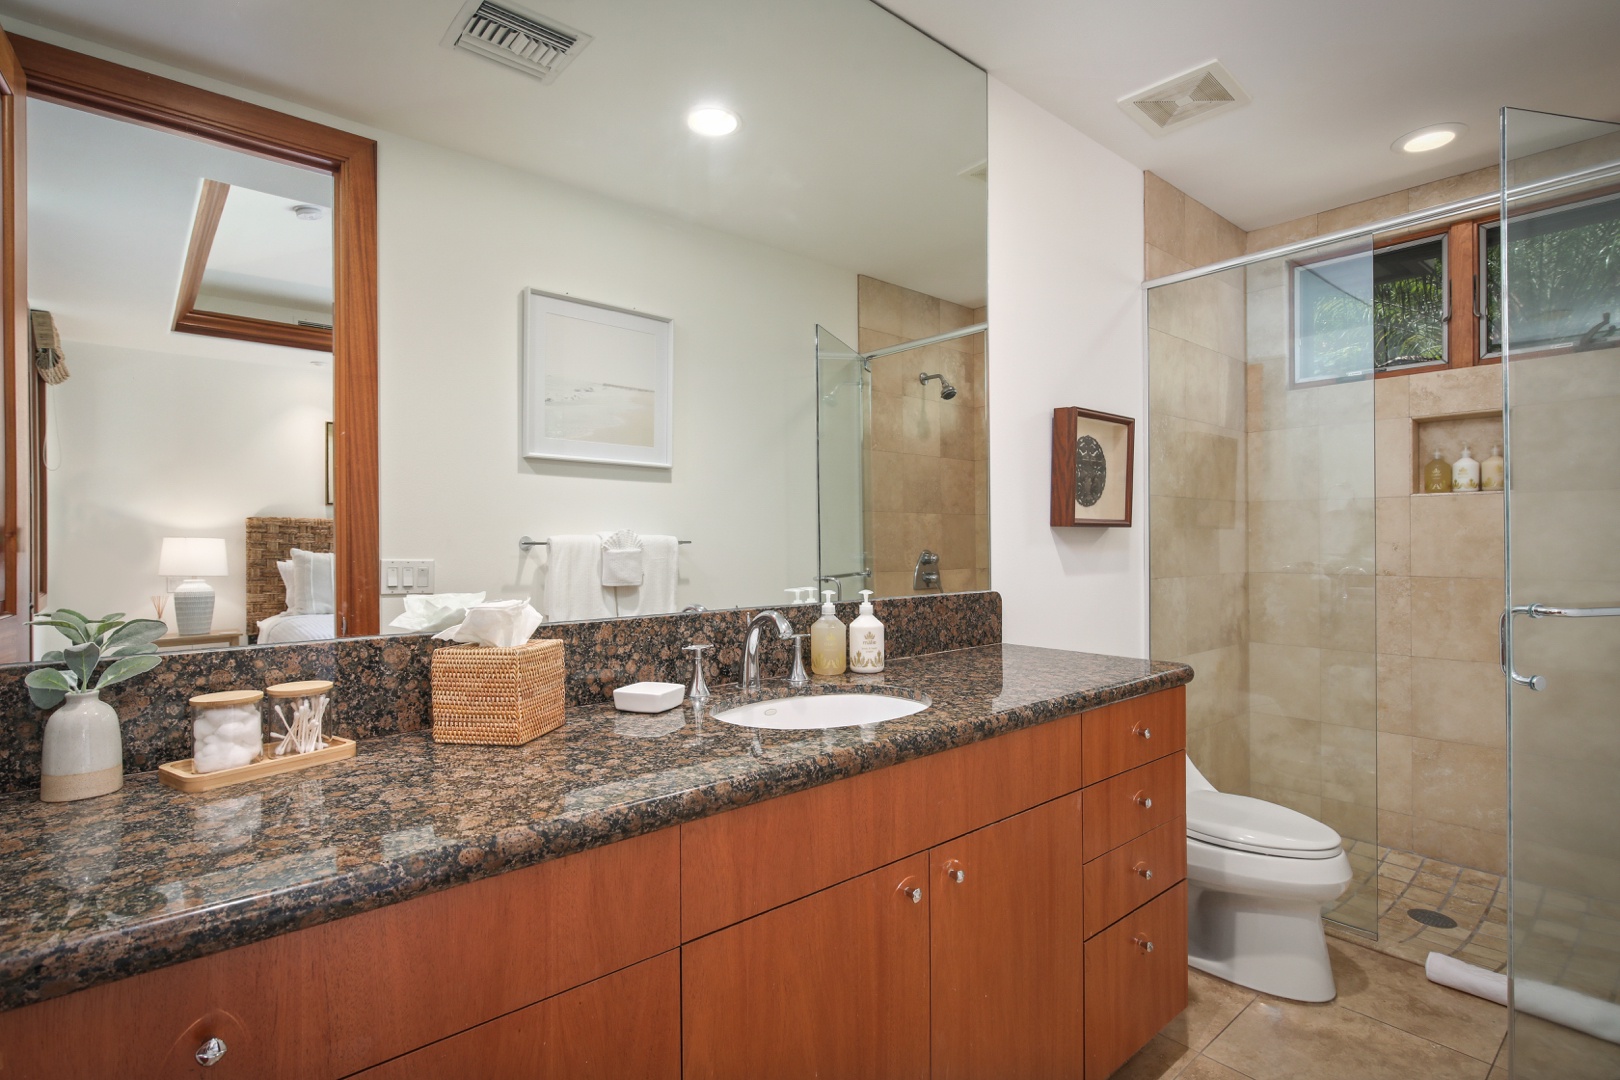 Kailua Kona Vacation Rentals, 4BD Pakui Street (147) Estate Home at Four Seasons Resort at Hualalai - Guest Suite #4’s en suite bath with large vanity and glass enclosed shower.